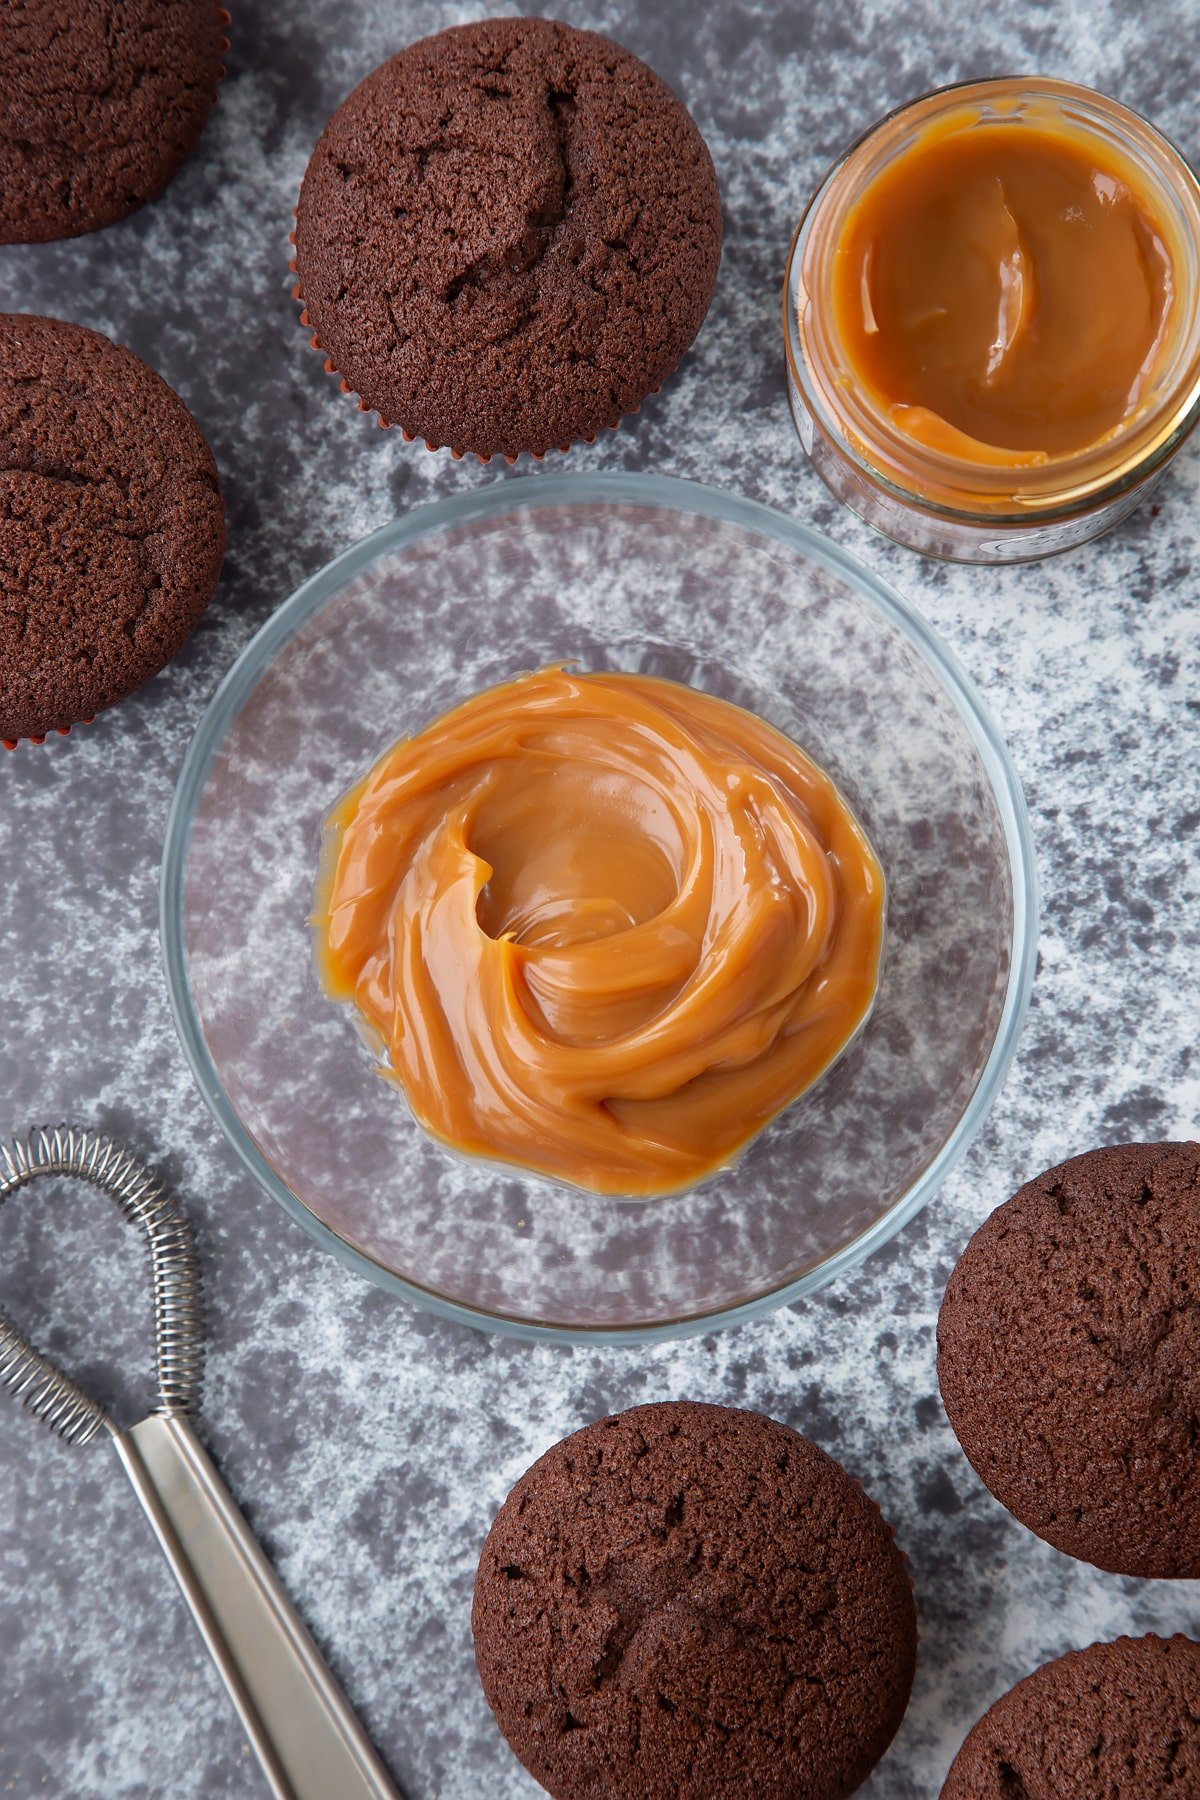 A small glass bowl of caramel. Chocolate cupcakes surround the bowl.